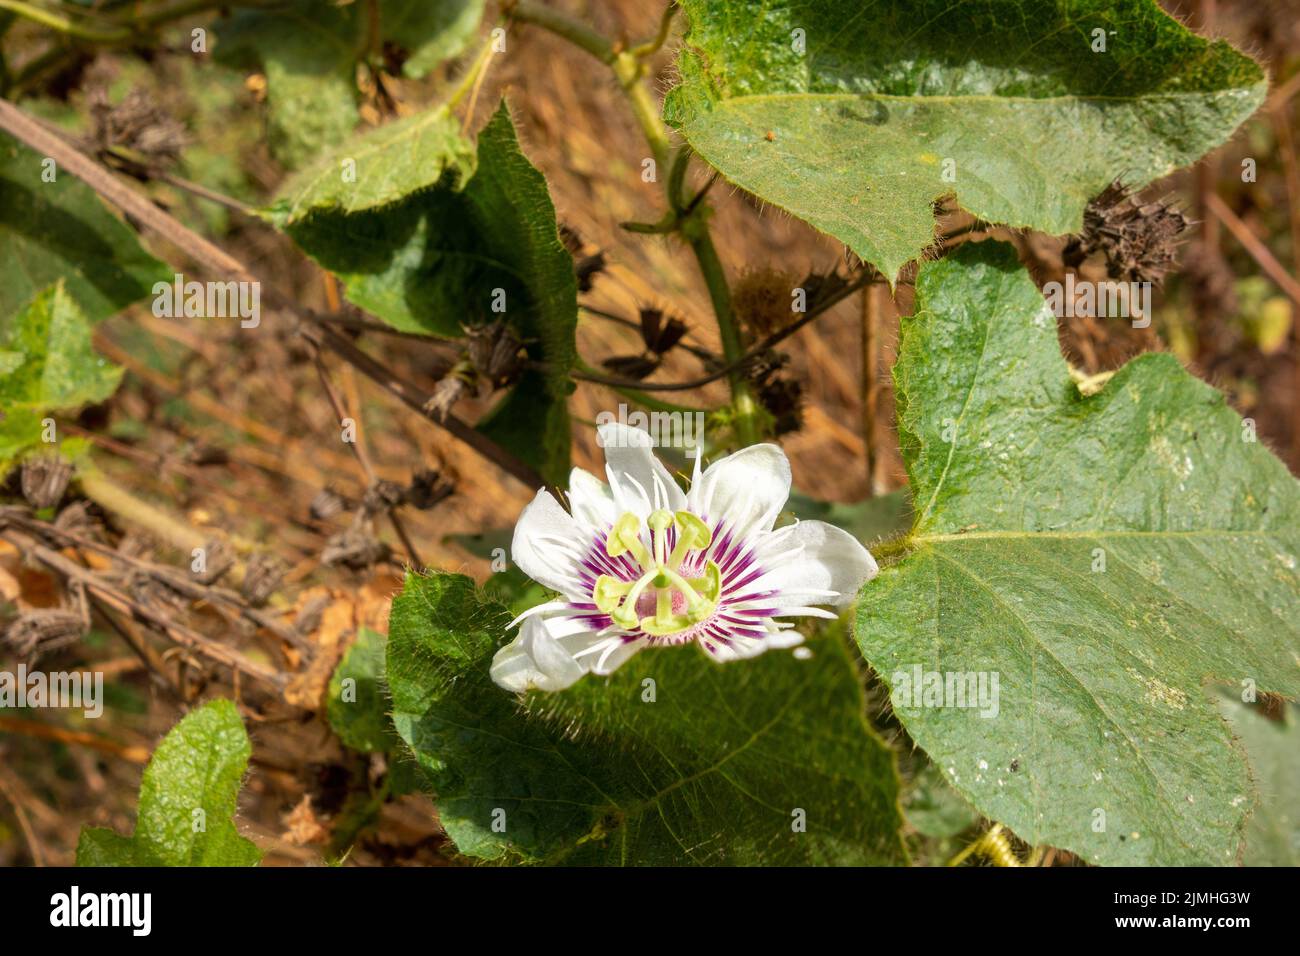 passion flower flower growing wild in West Africa Stock Photo